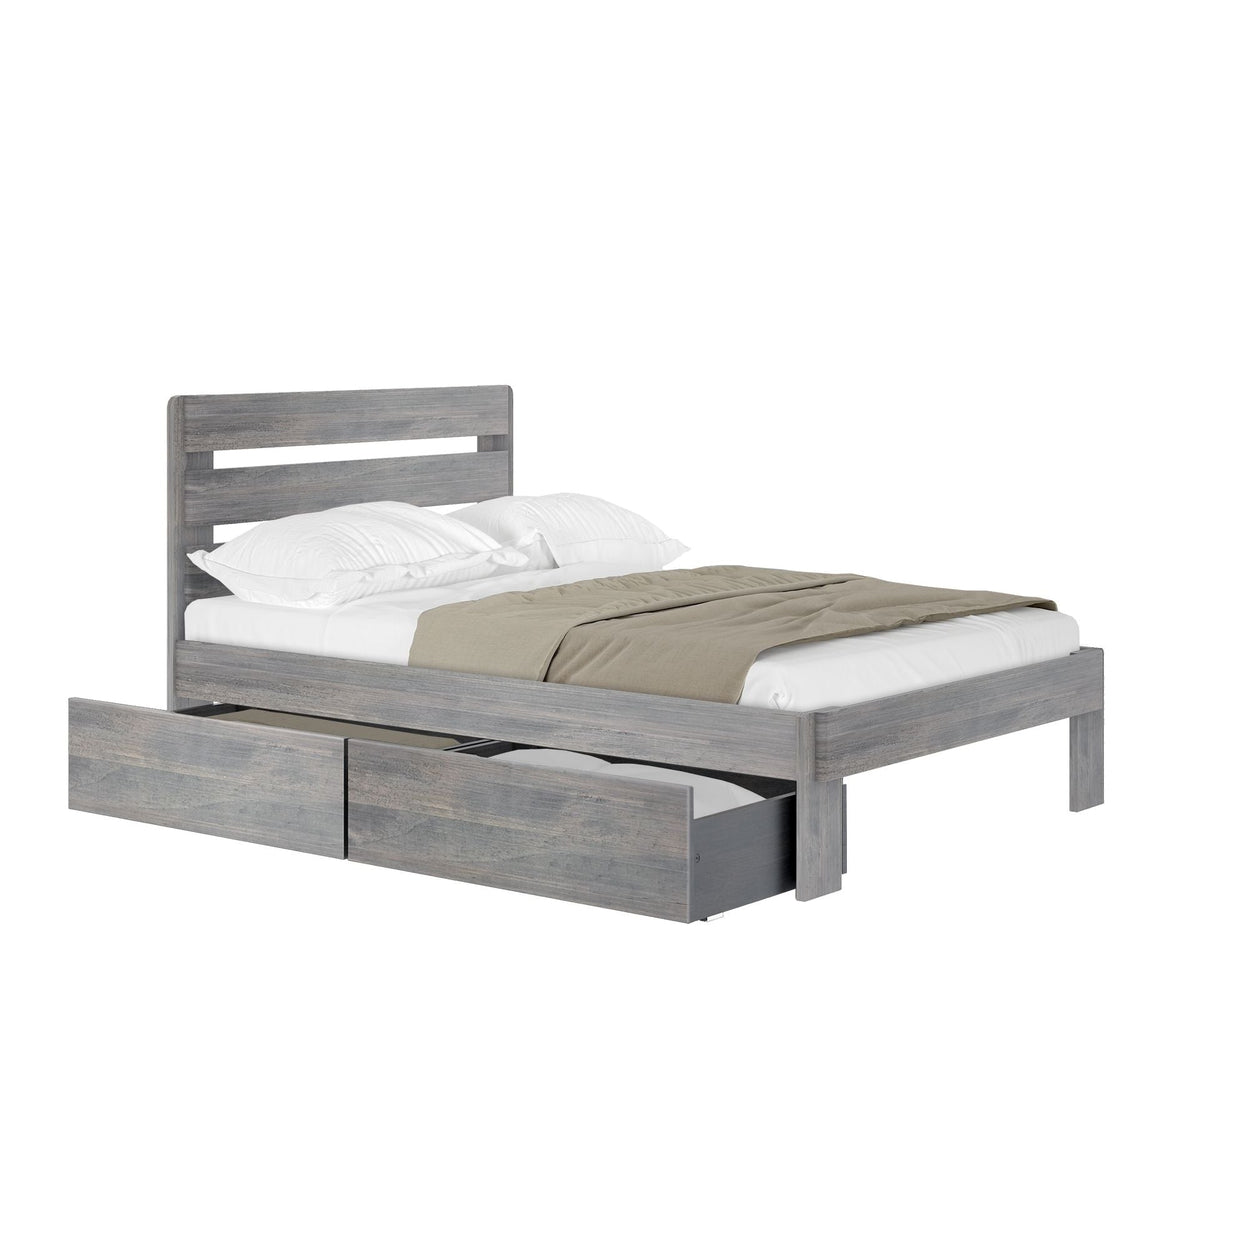 Rustic Full Bed with Slatted Headboard + Underbed Storage Single Beds Plank+Beam Driftwood 